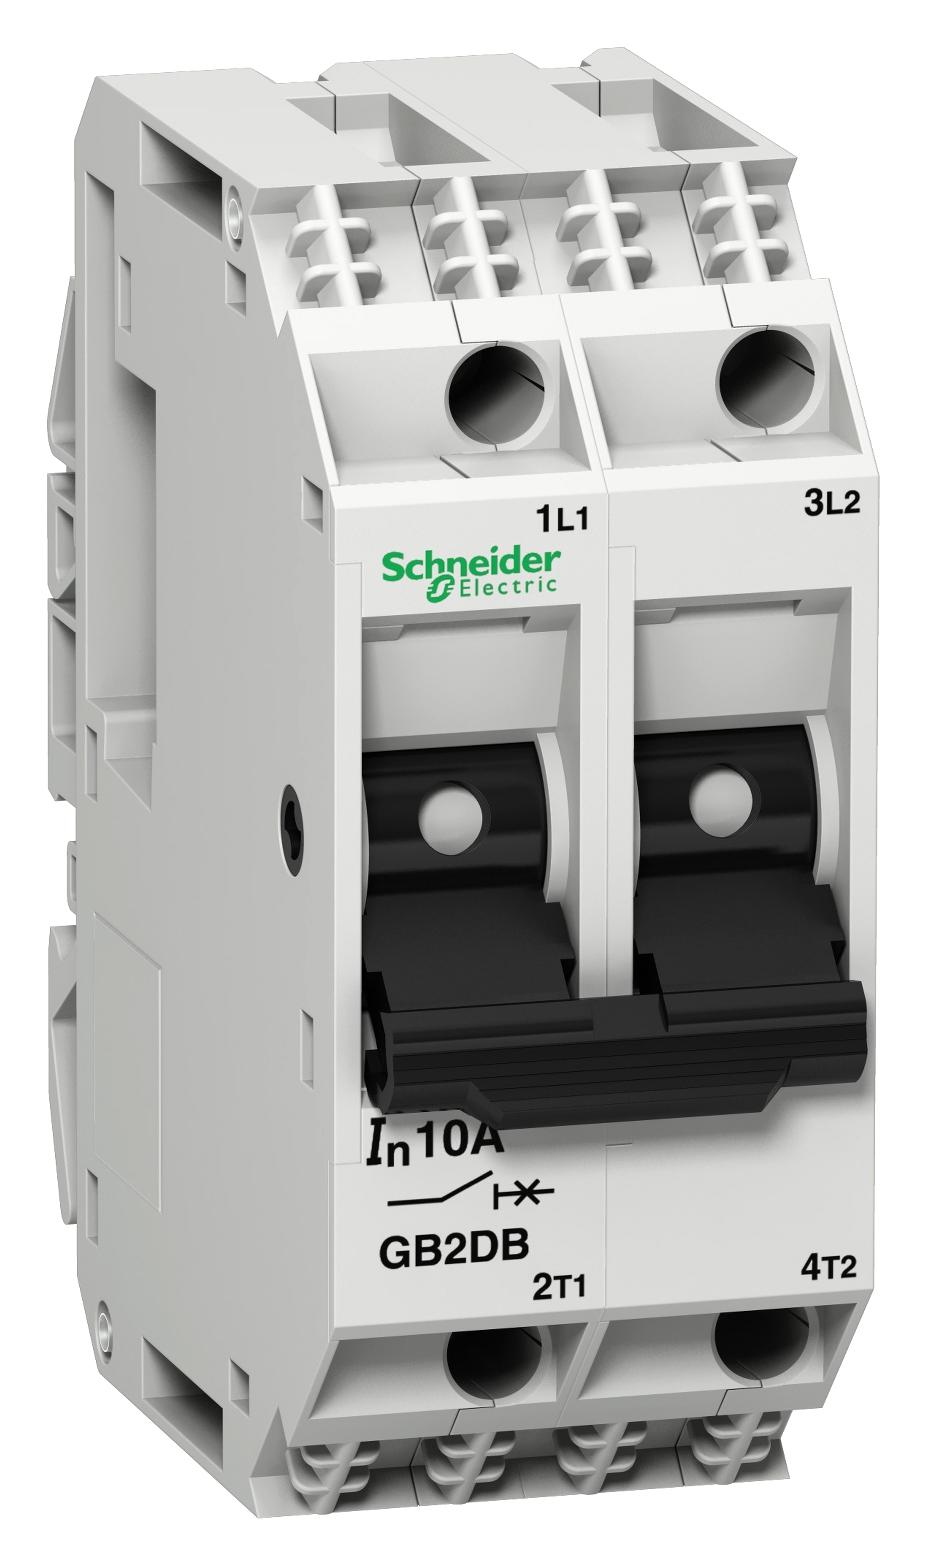 GB2DB12 THERMOMAGNETIC CKT BREAKER, 2P, 6A SCHNEIDER ELECTRIC